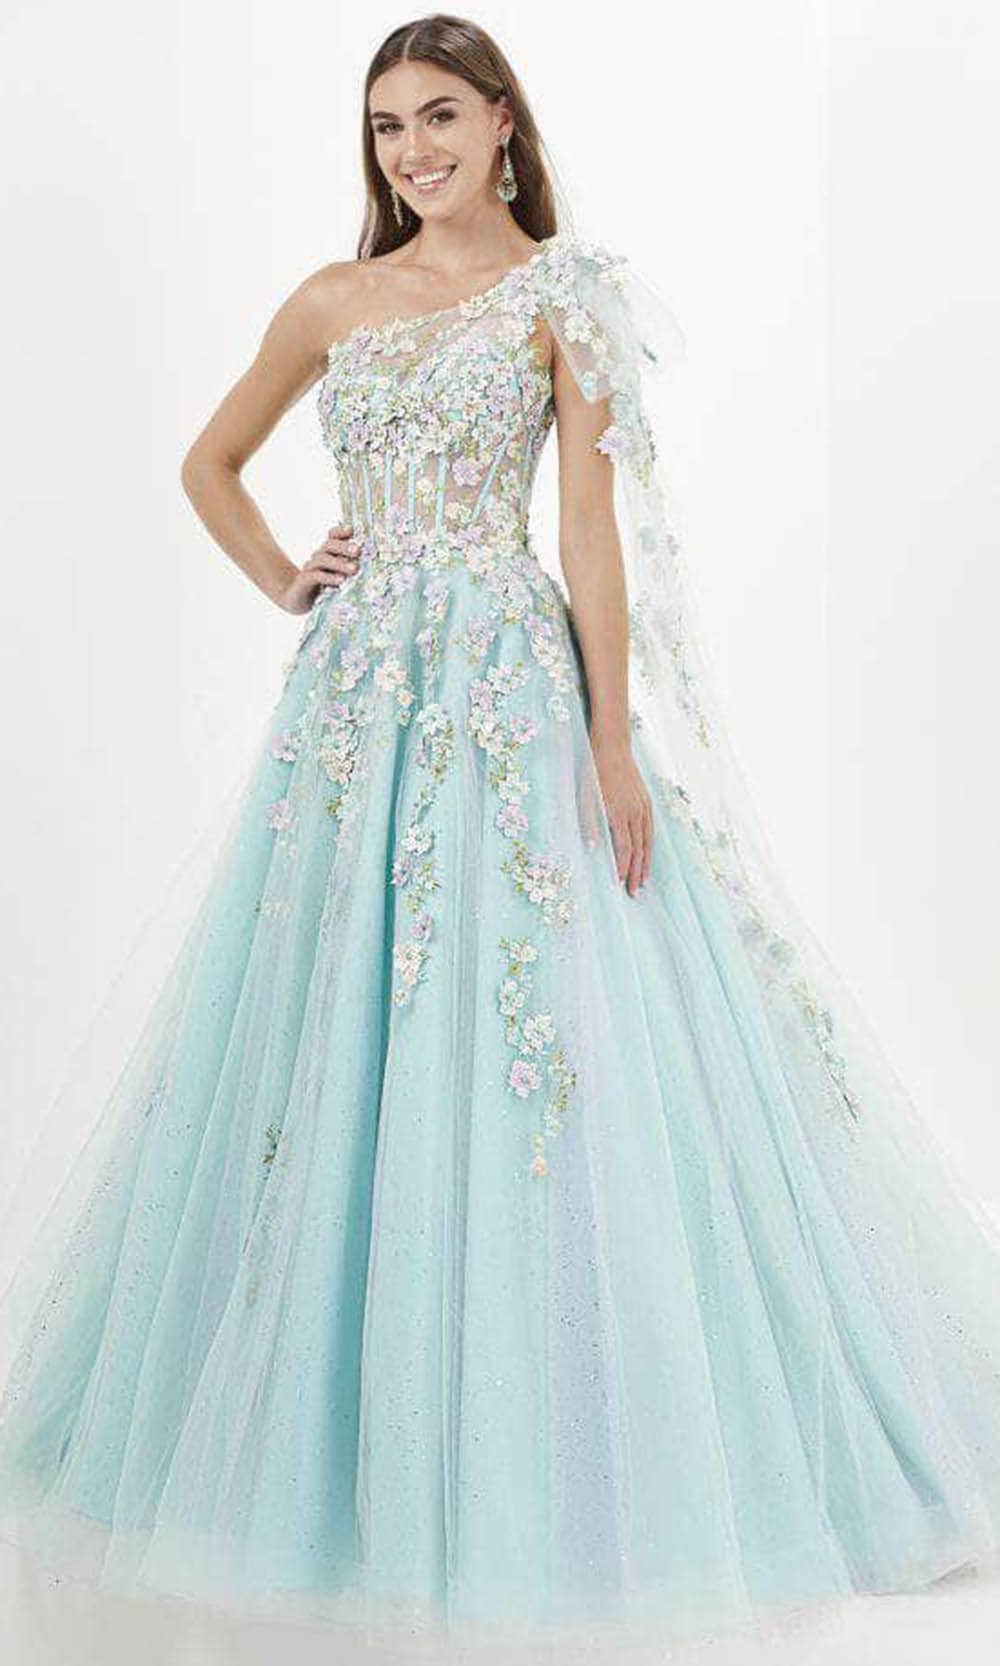 Image of Tiffany Designs 16079 - Floral Appliqued Asymmetric Evening Gown